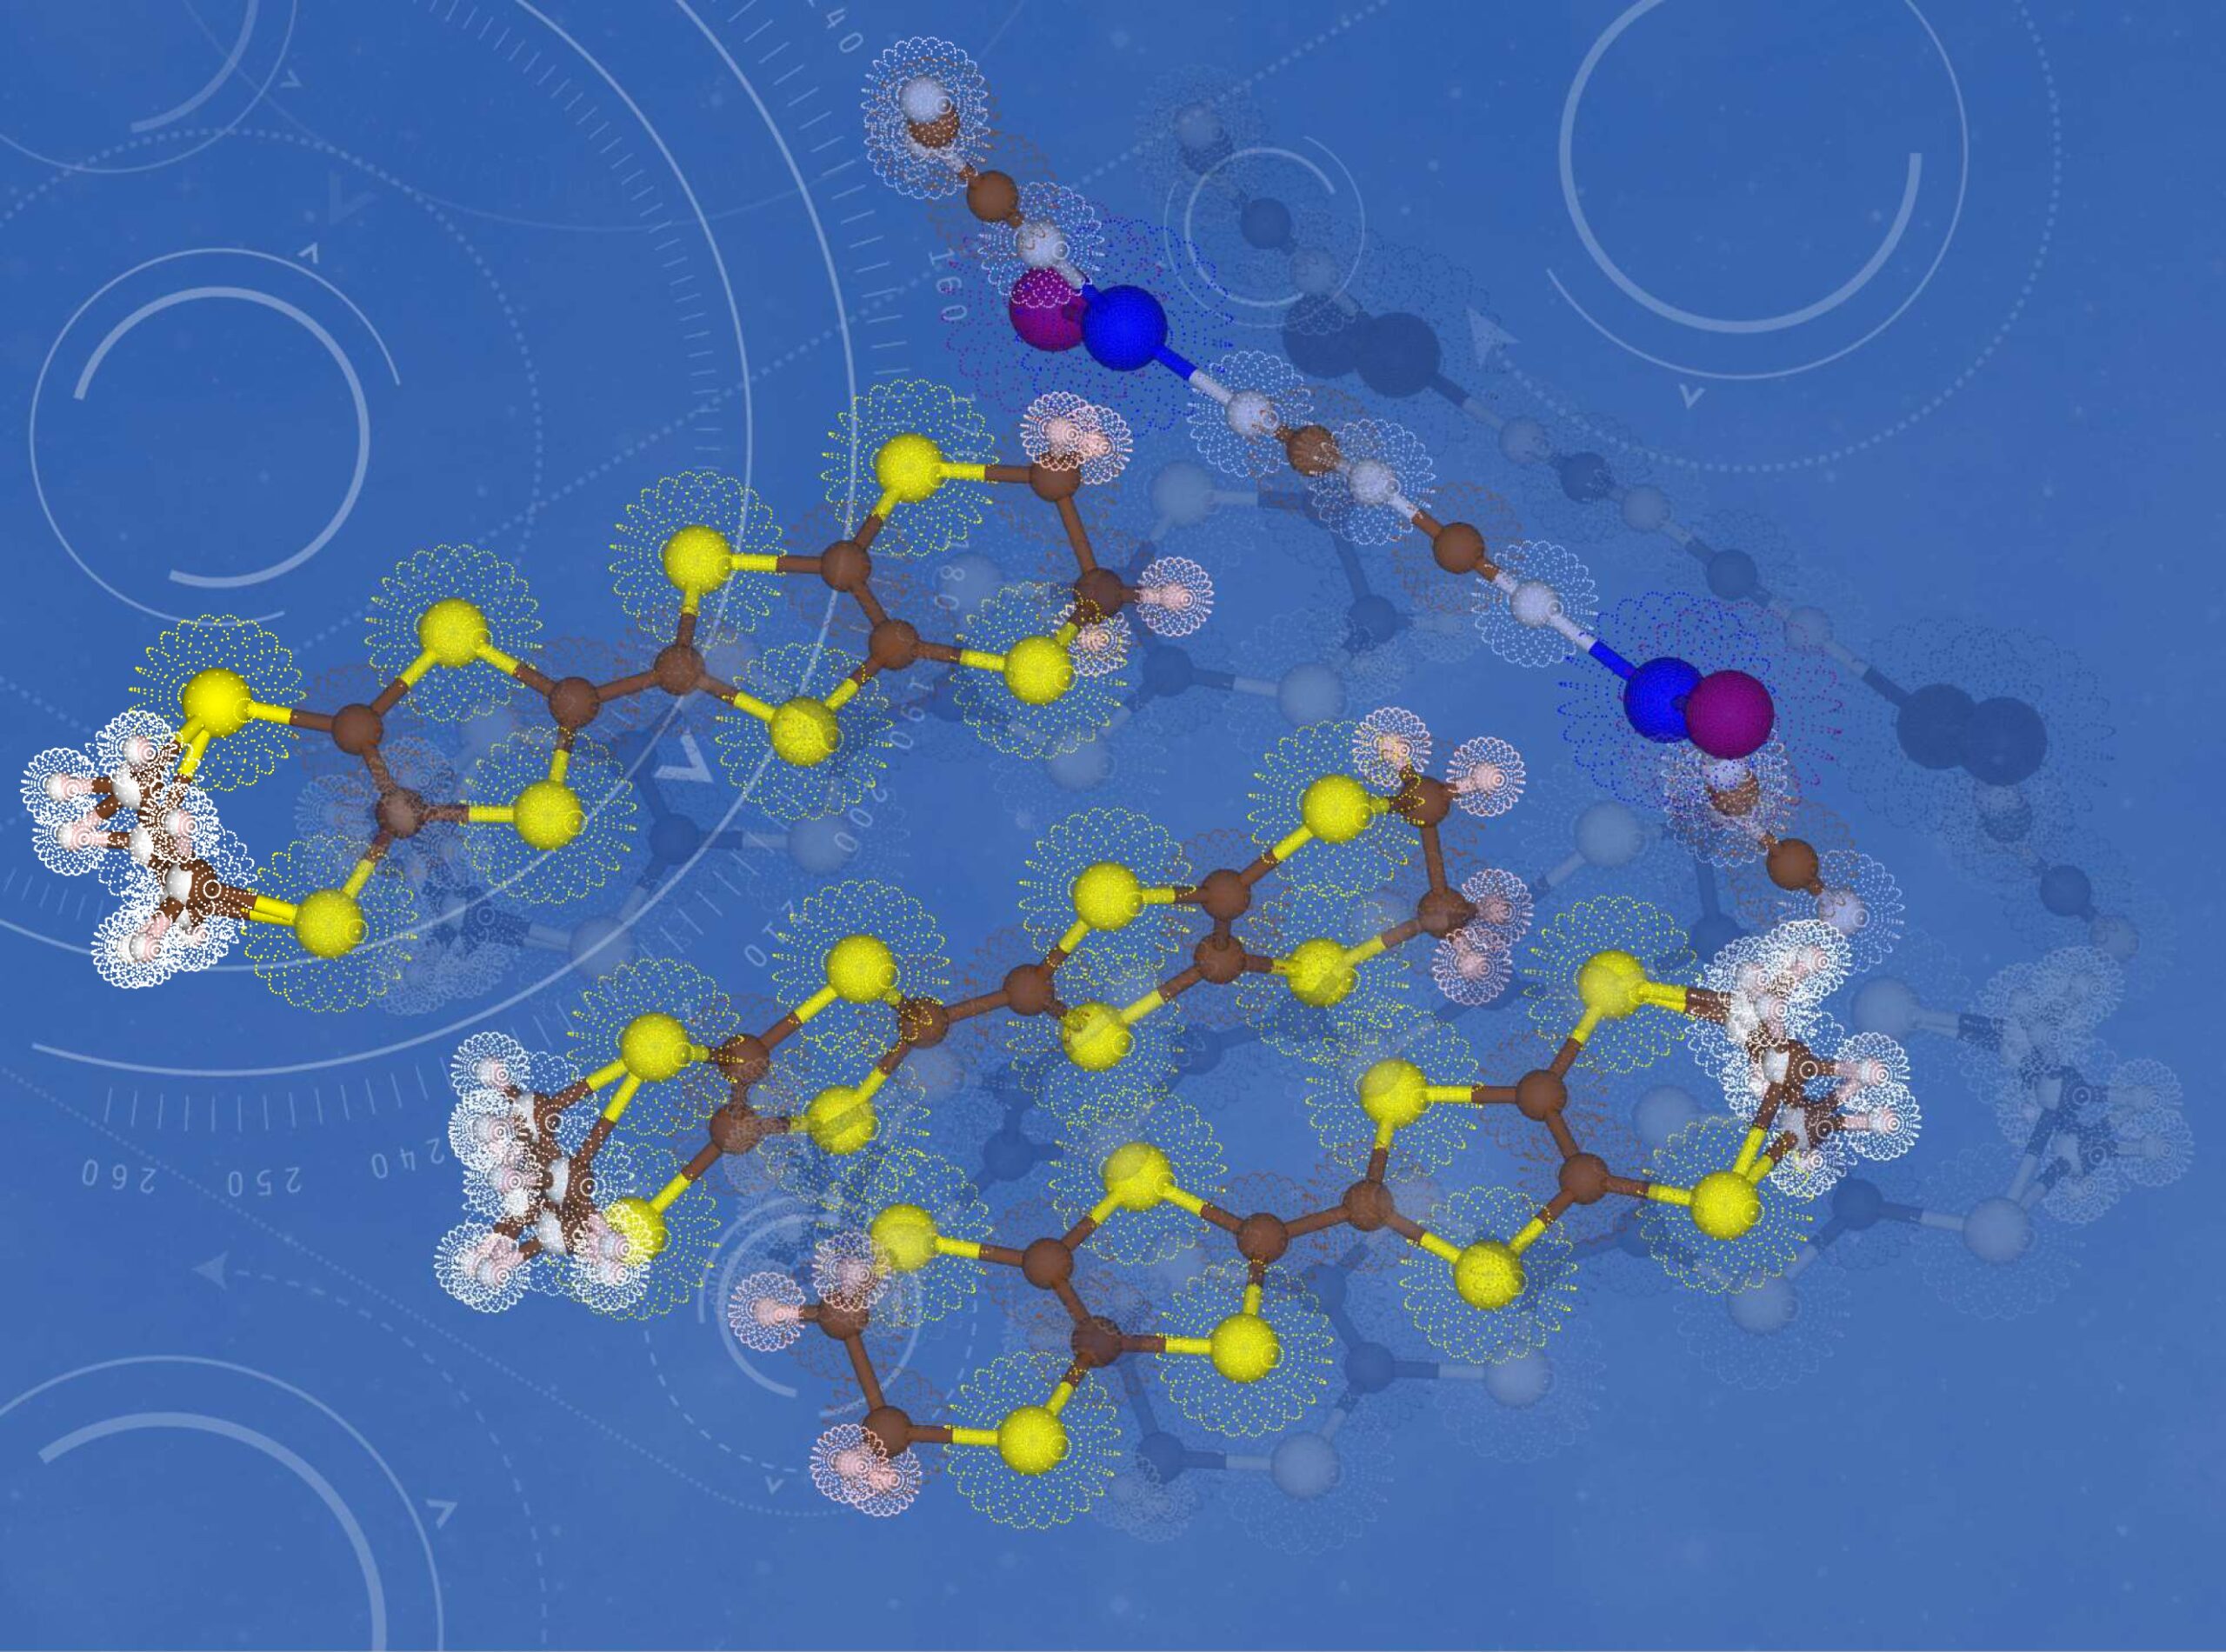 The molecular structures and electron densities revealed in this study (2)